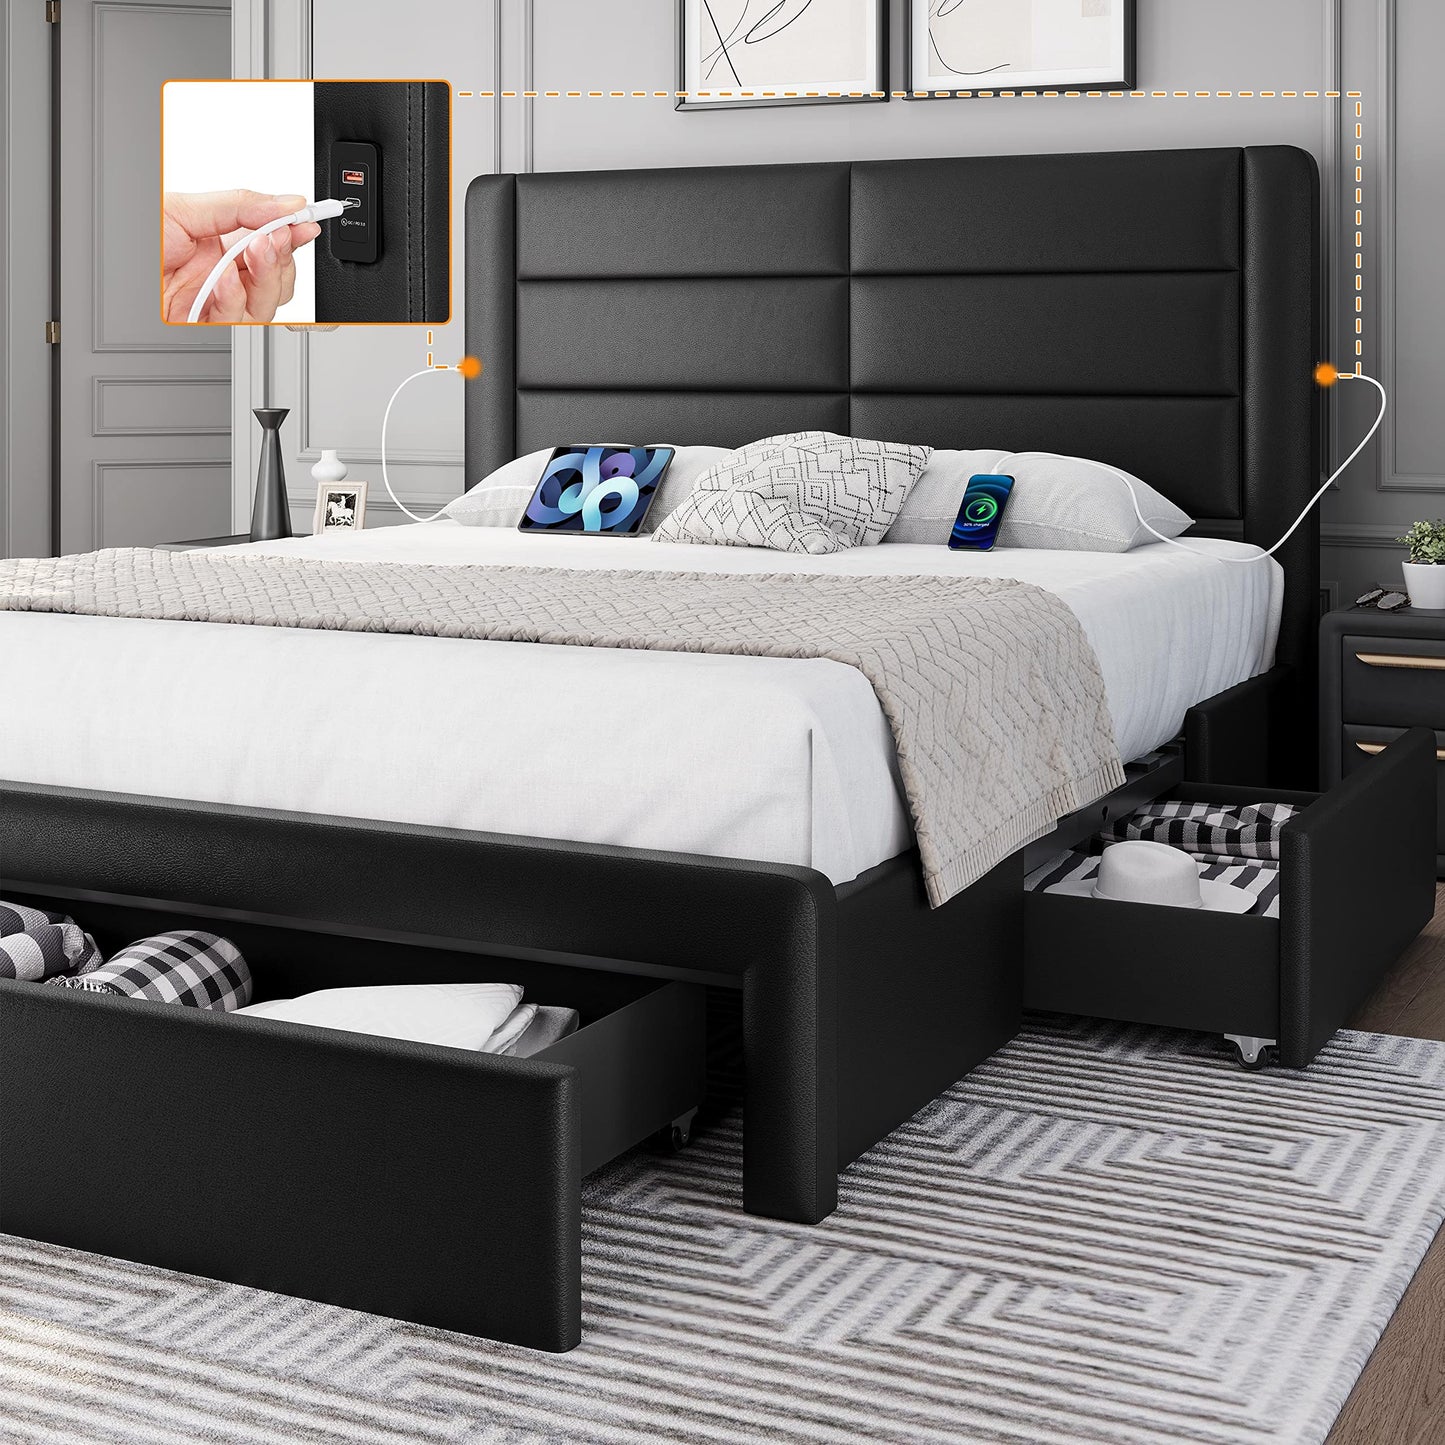 Yaheetech Queen Size Bed Frame Platform with 2 USB Charging Station/Port for Type A&Type C/3 Storage Drawers, Leather Upholstered with